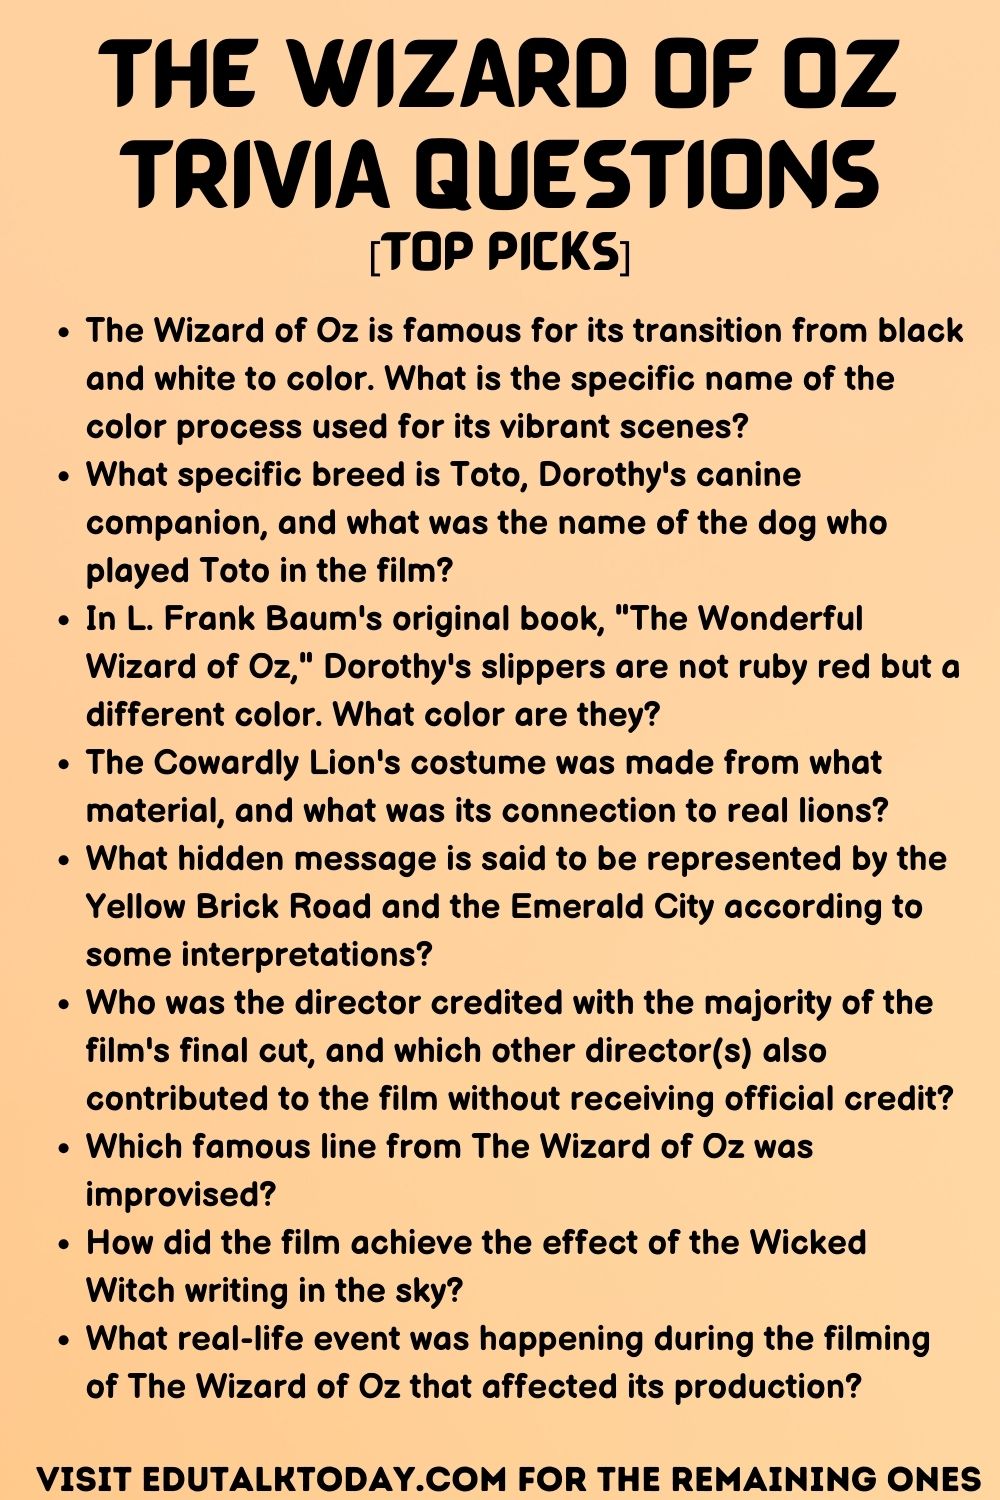 The Wizard of Oz Trivia Questions